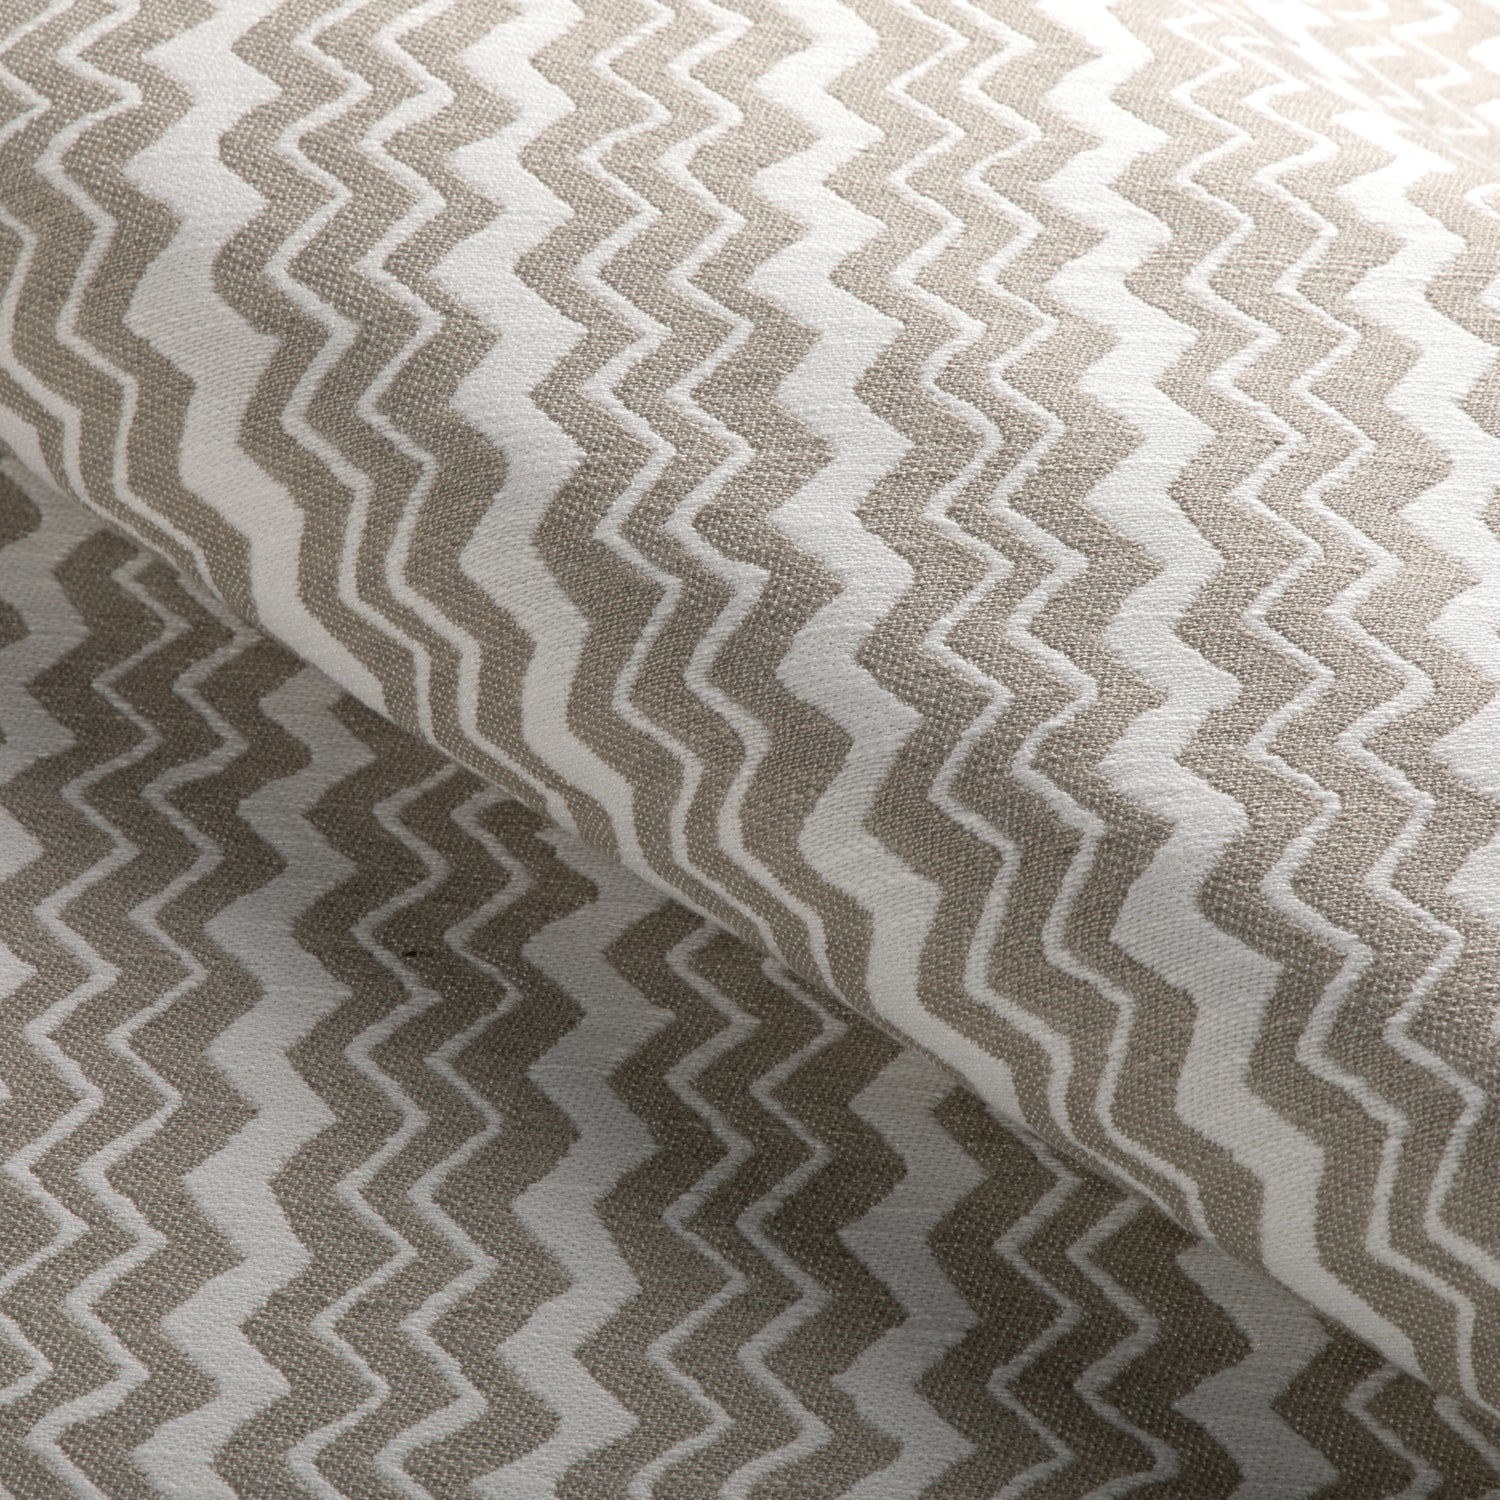 Fabric sample of Matipi fabric in sand color - pattern 36925.16.0 - by Kravet Couture in the Riviera collection